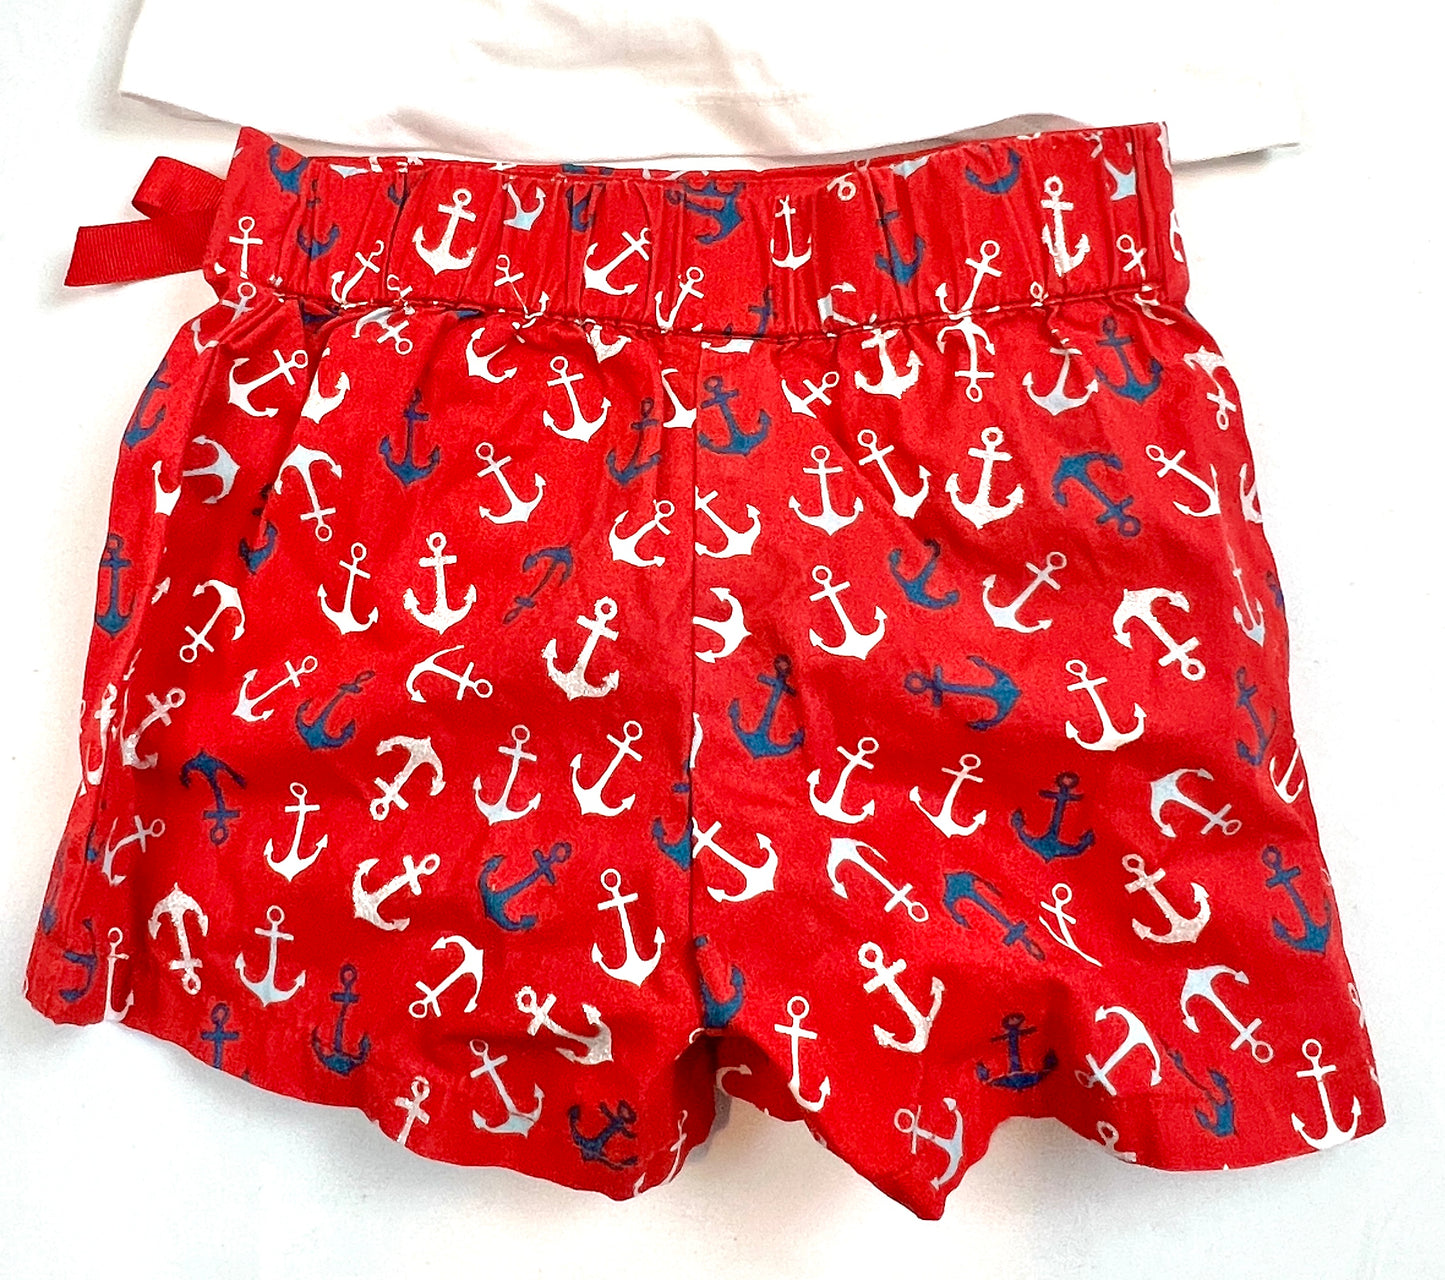 Girls Size 4 Anchor 3 Piece Outfit EUC - Sequence Flip Anchor Shirt, red Anchor Pattern Skort/Shirt Bottoms and Hair Box